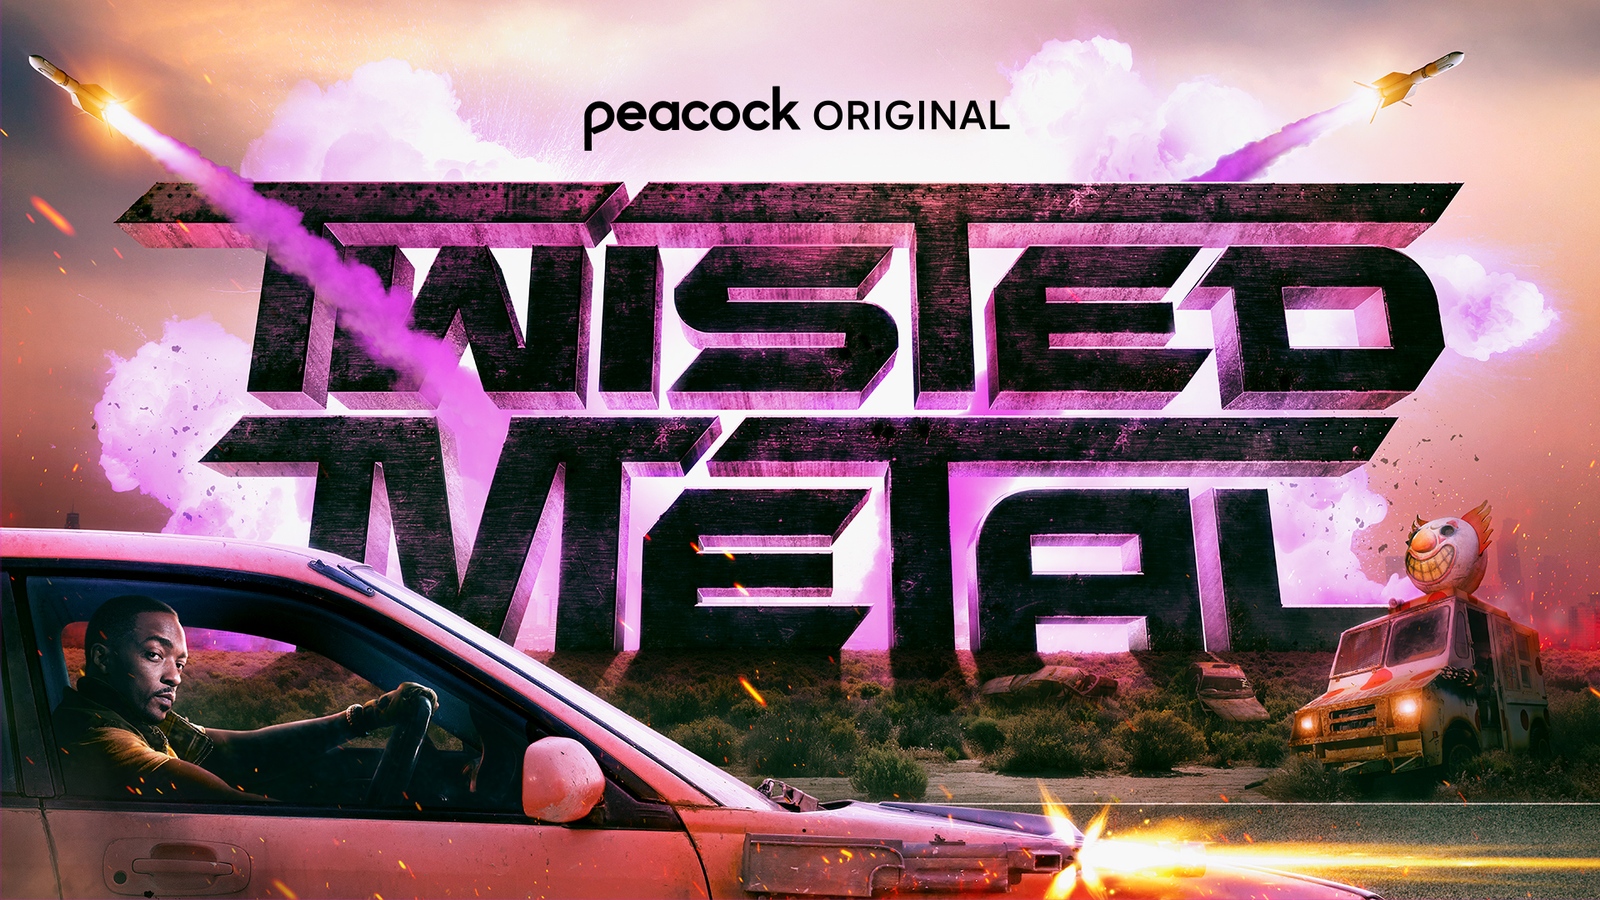 Sony is developing a live-action 'Twisted Metal' TV series